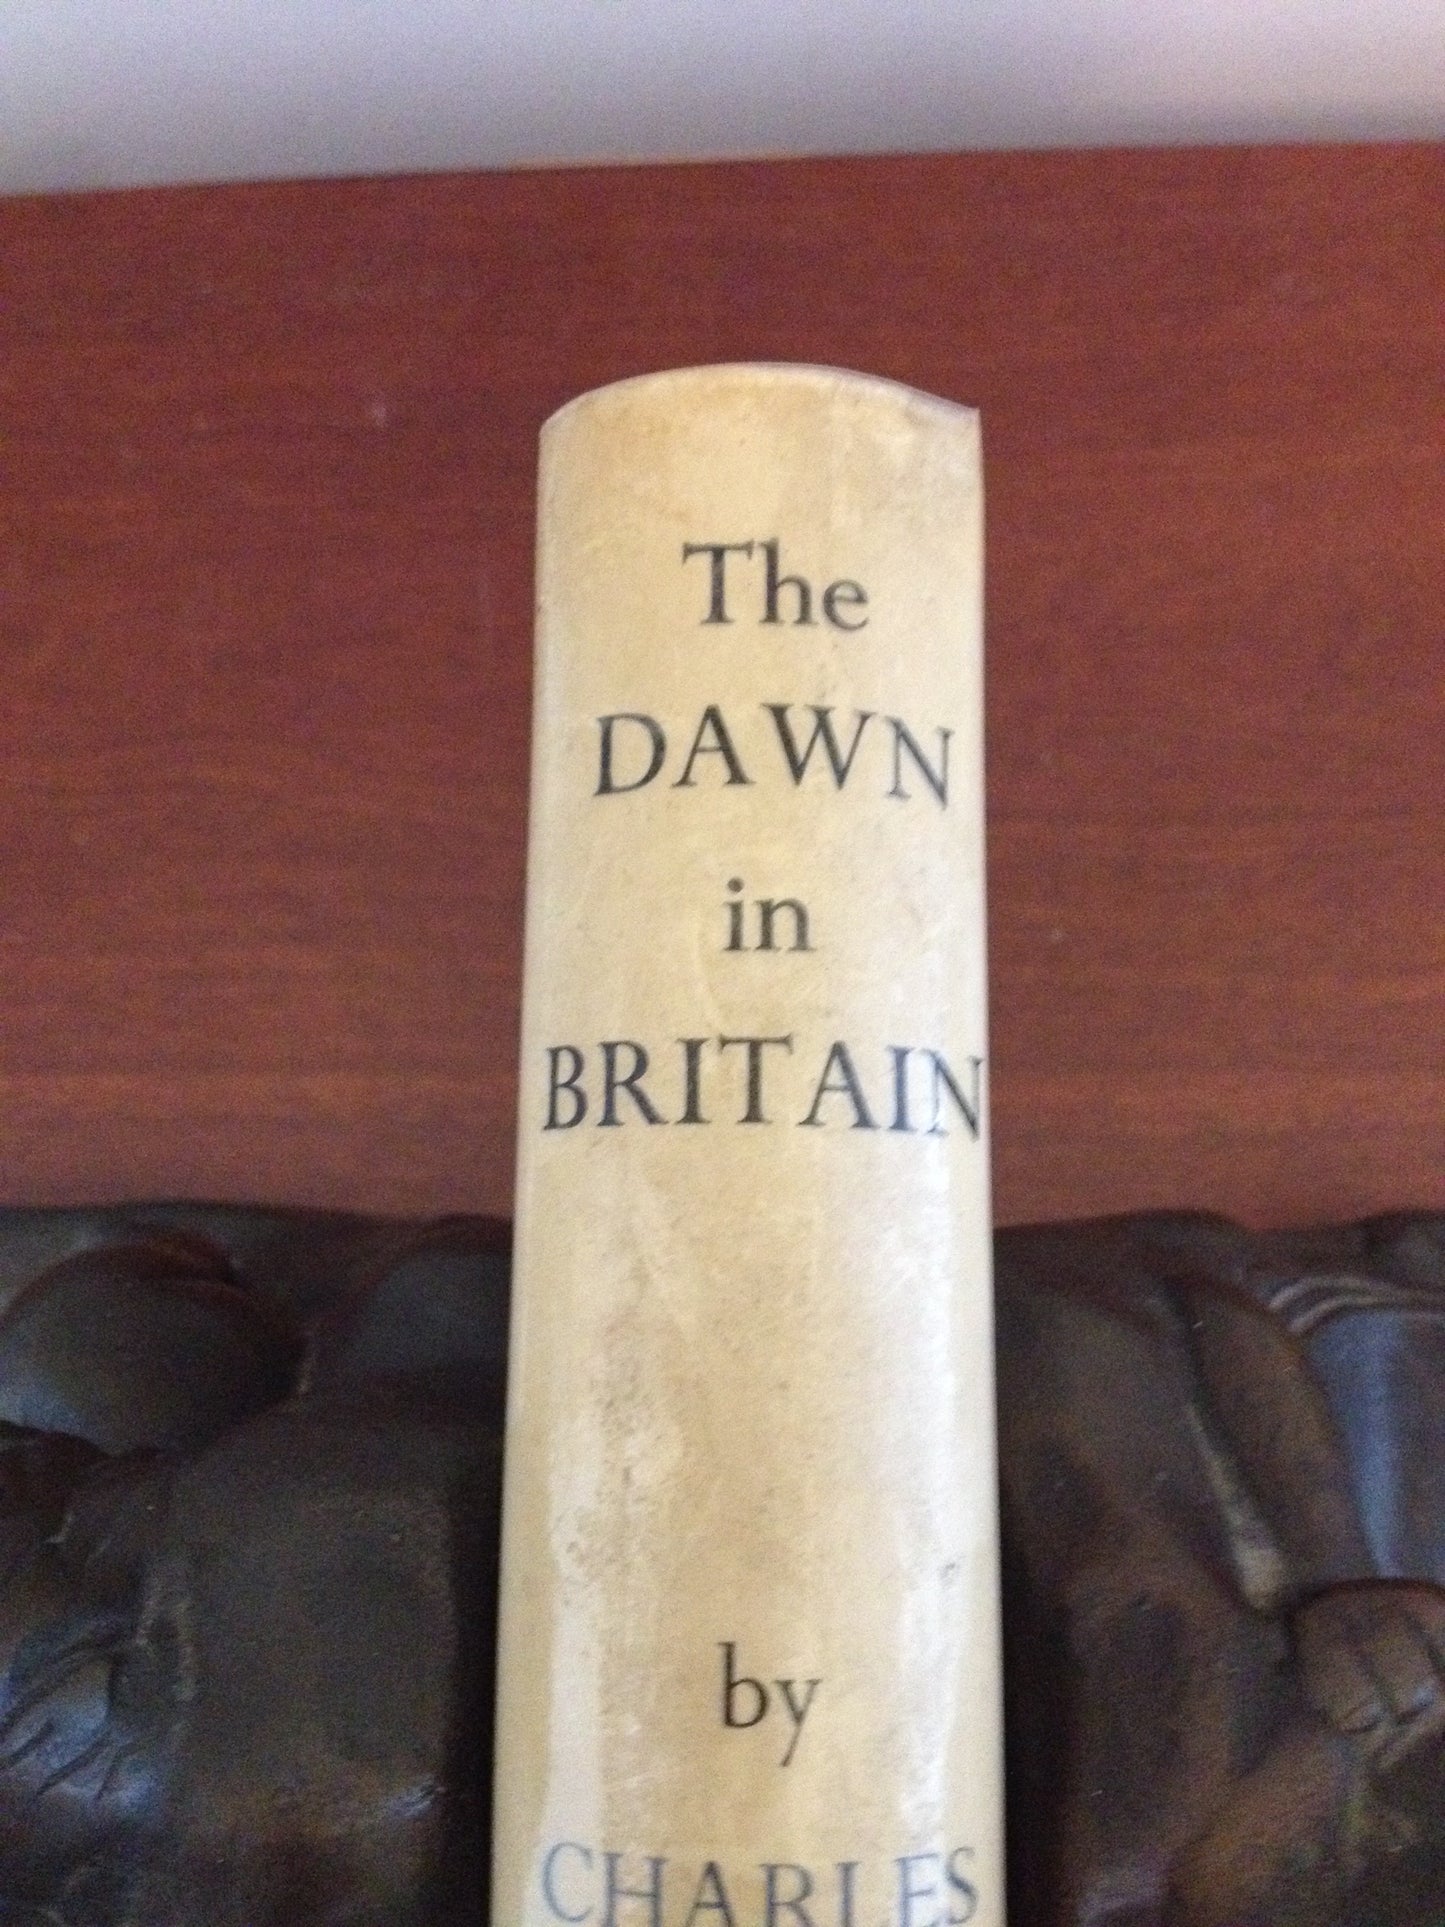 THE DAWN IN BRITAIN   BY: CHARLES M. DOUGHTY